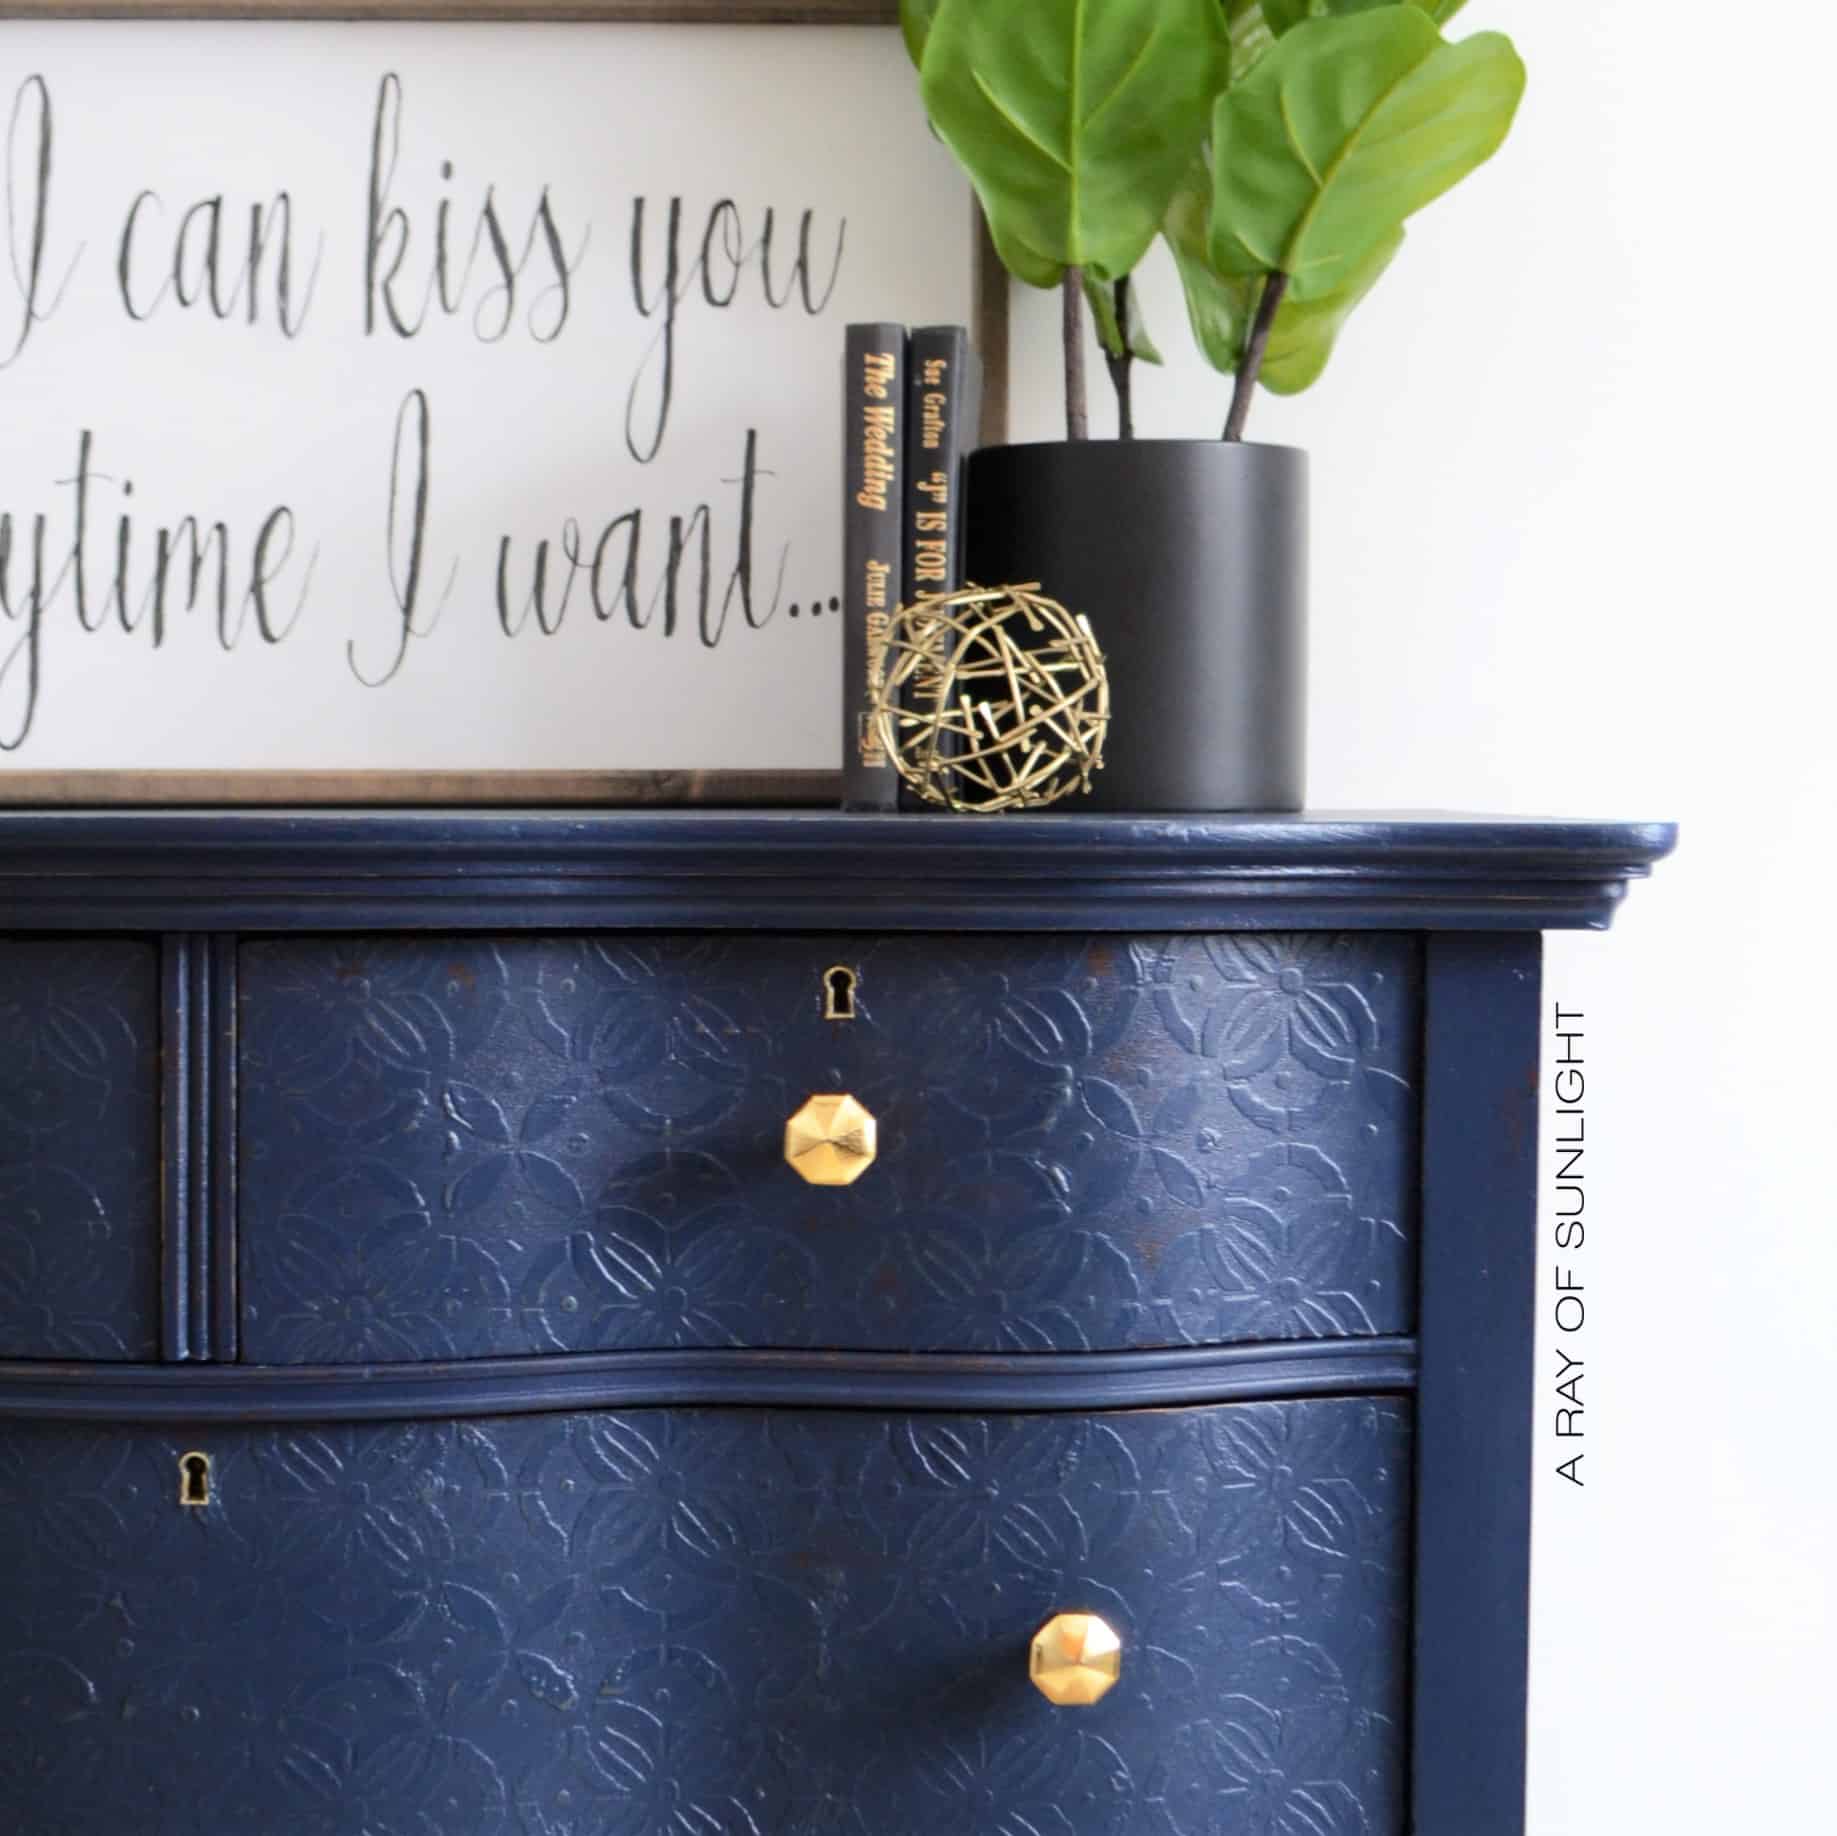 The Navy Dresser with Textured Drawers